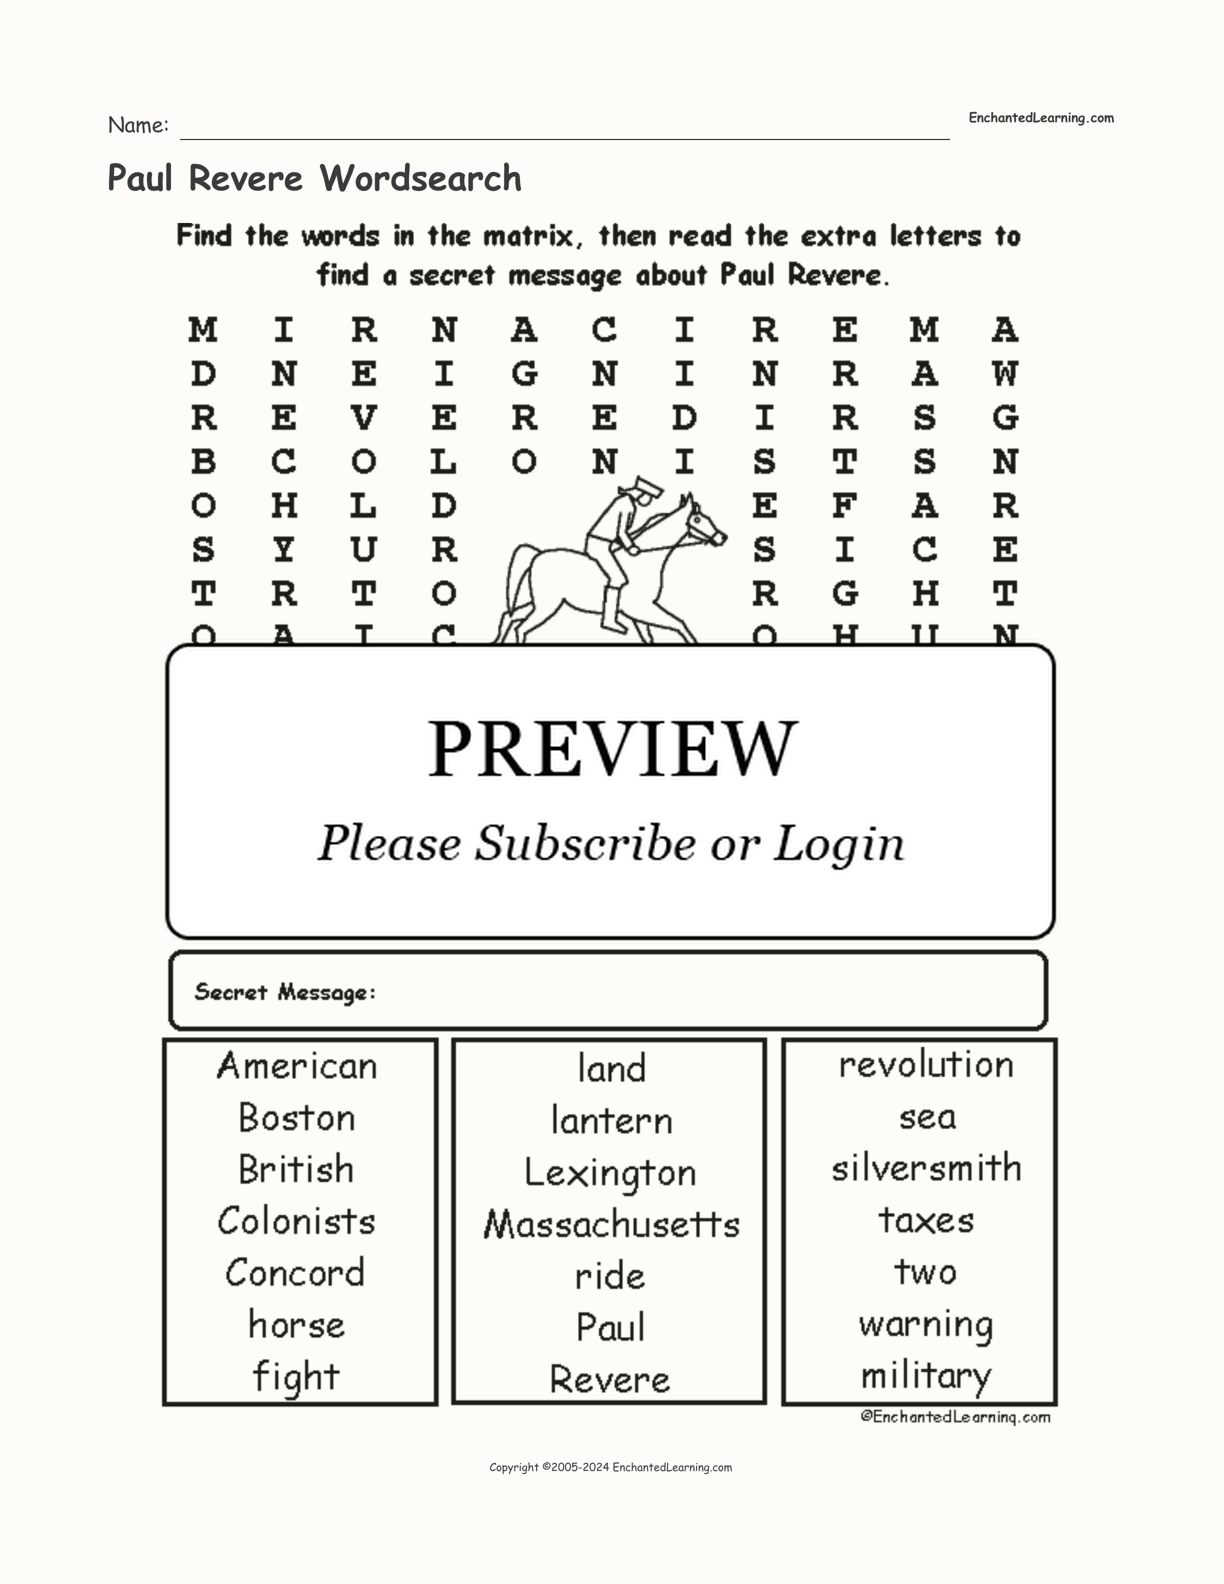 Paul Revere Wordsearch interactive worksheet page 1